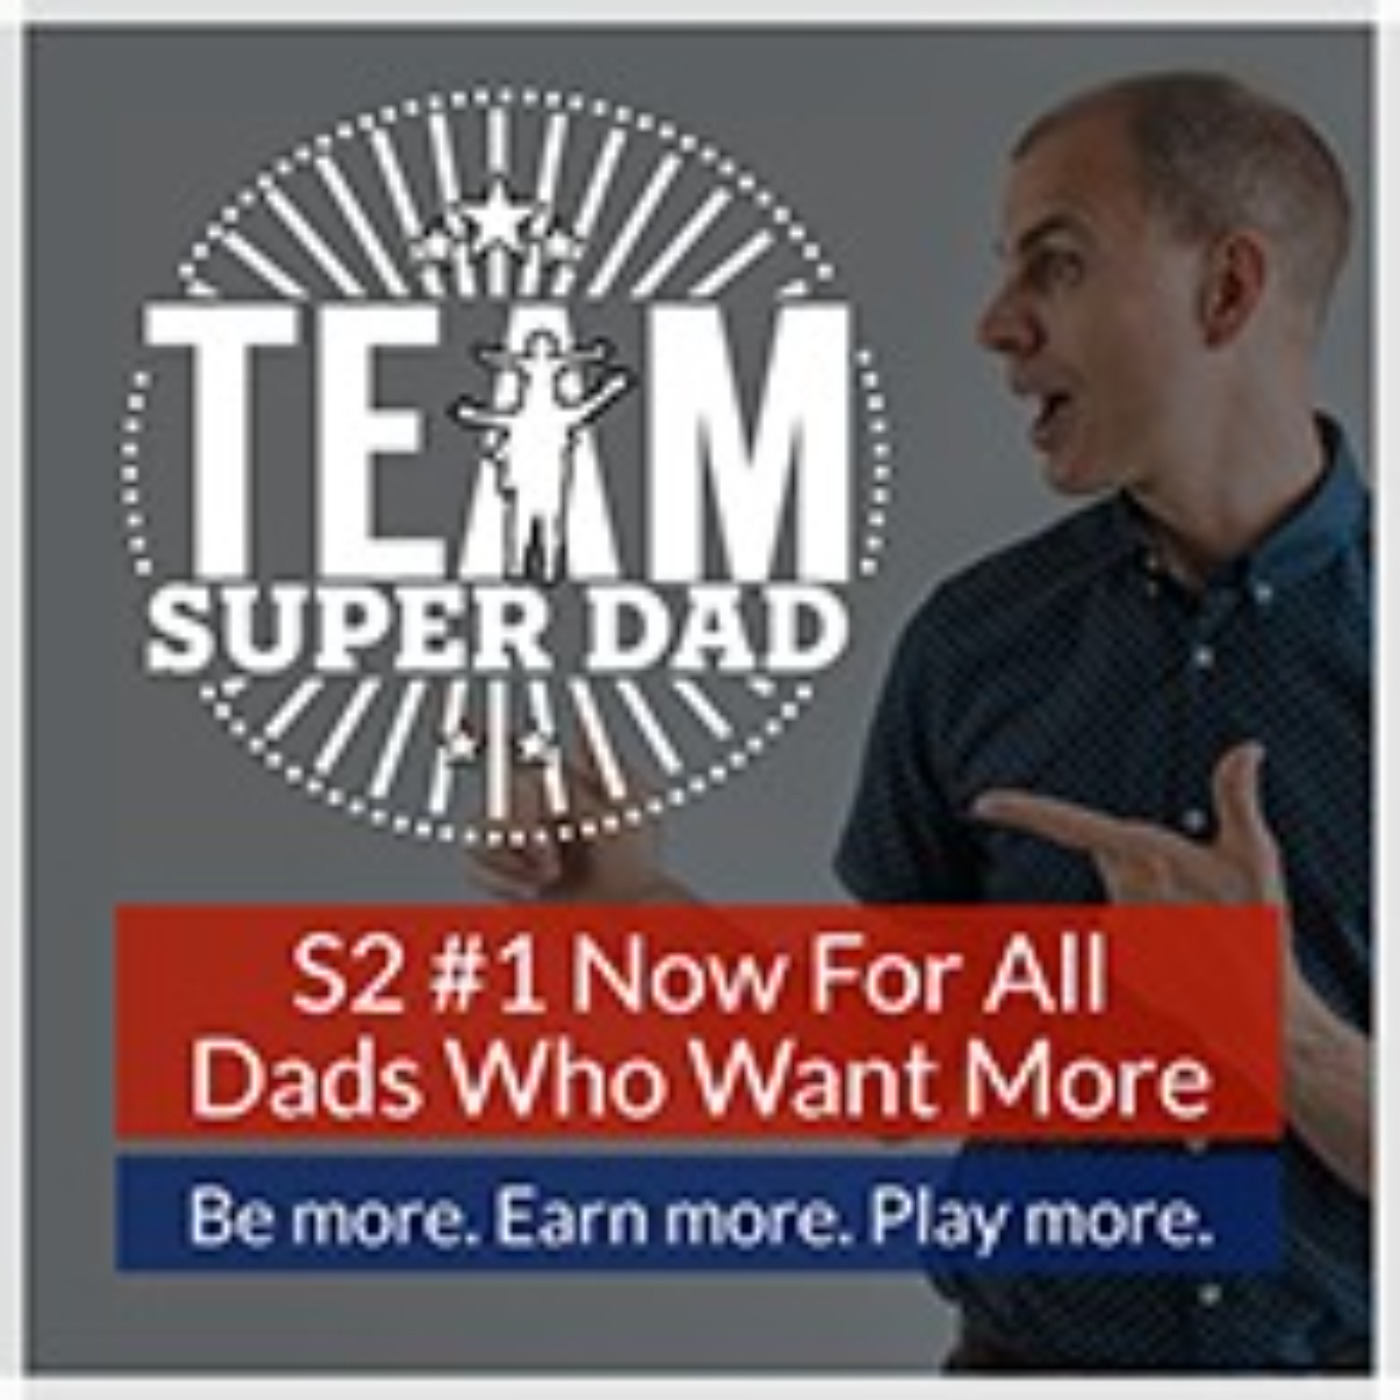 Season 2 - Team Super Dad for Dads Who Want More